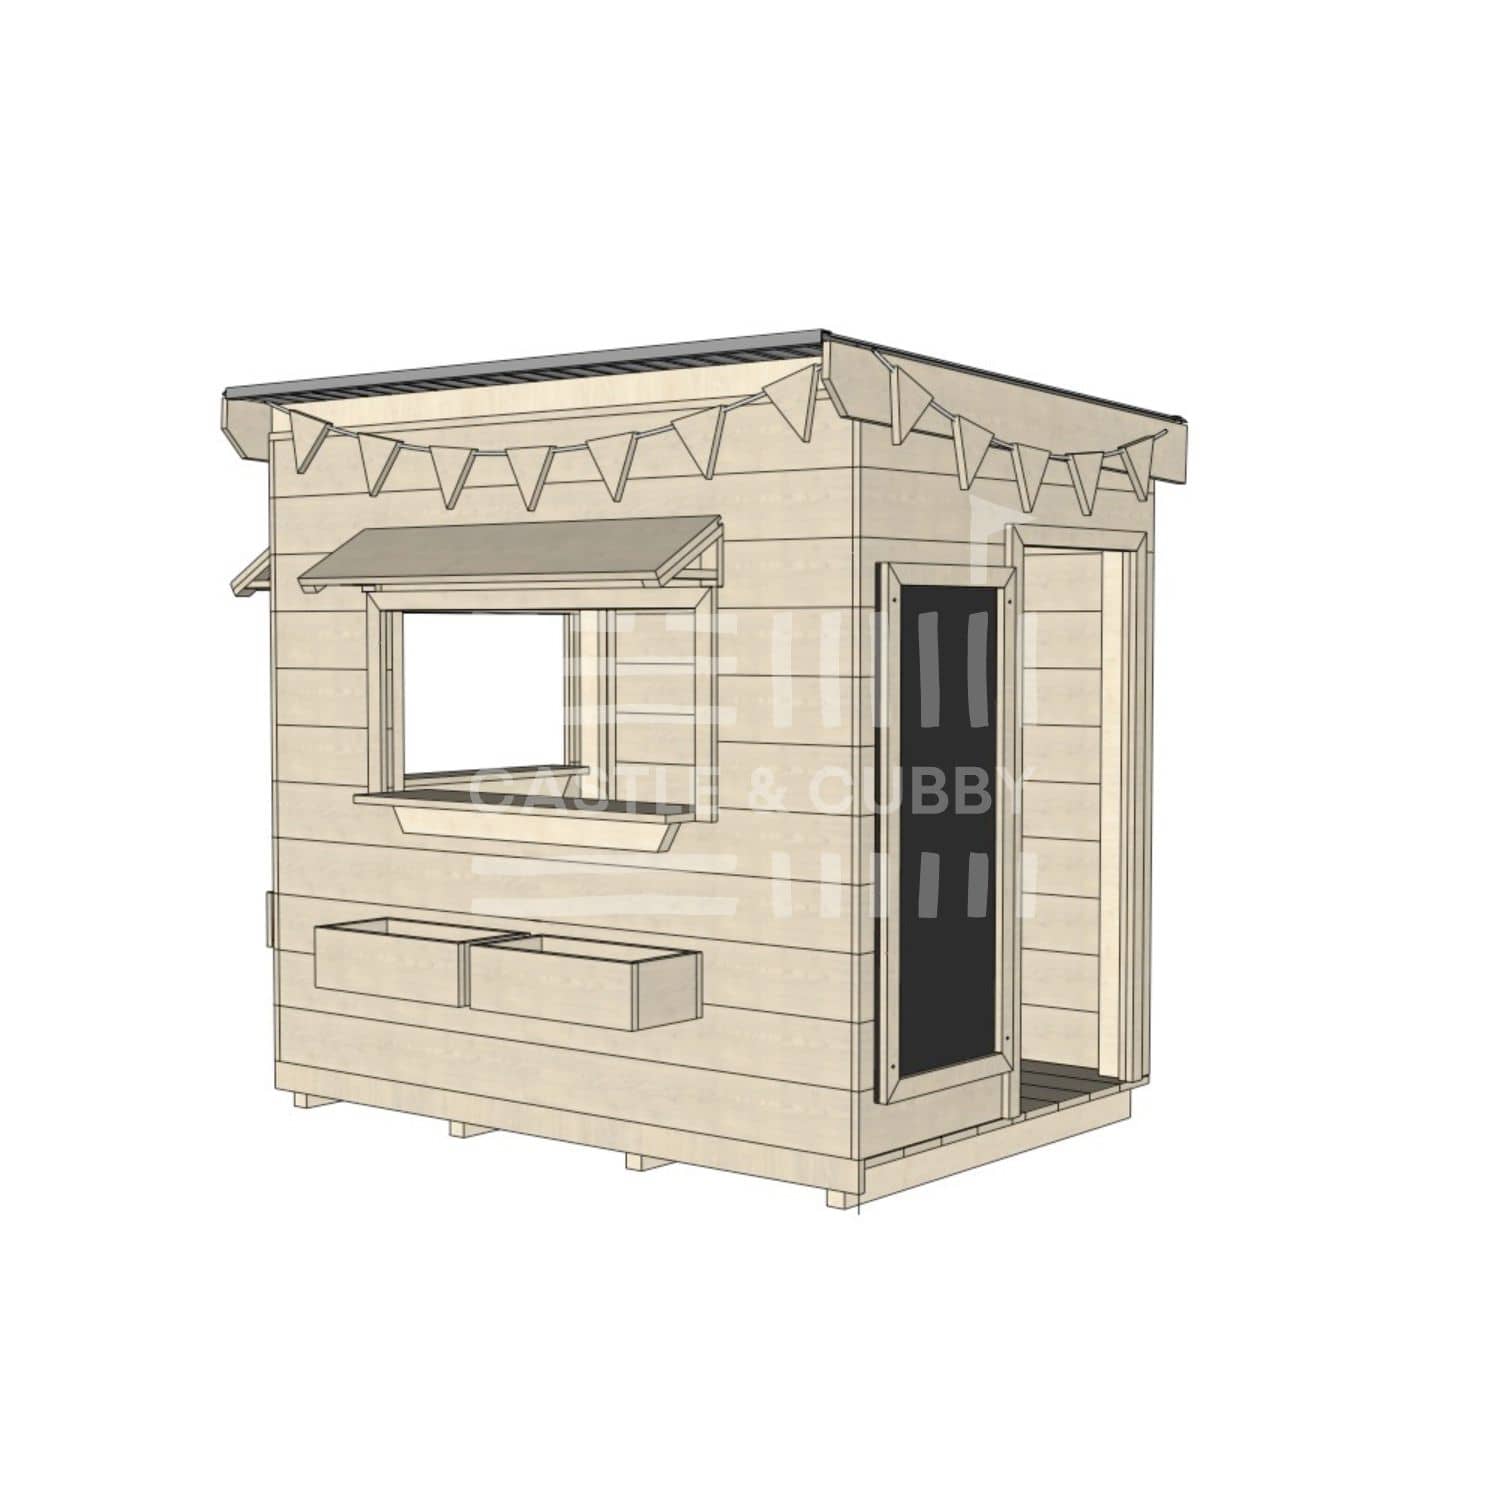 Flat roof raw wooden cubby house commercial education little rectangle